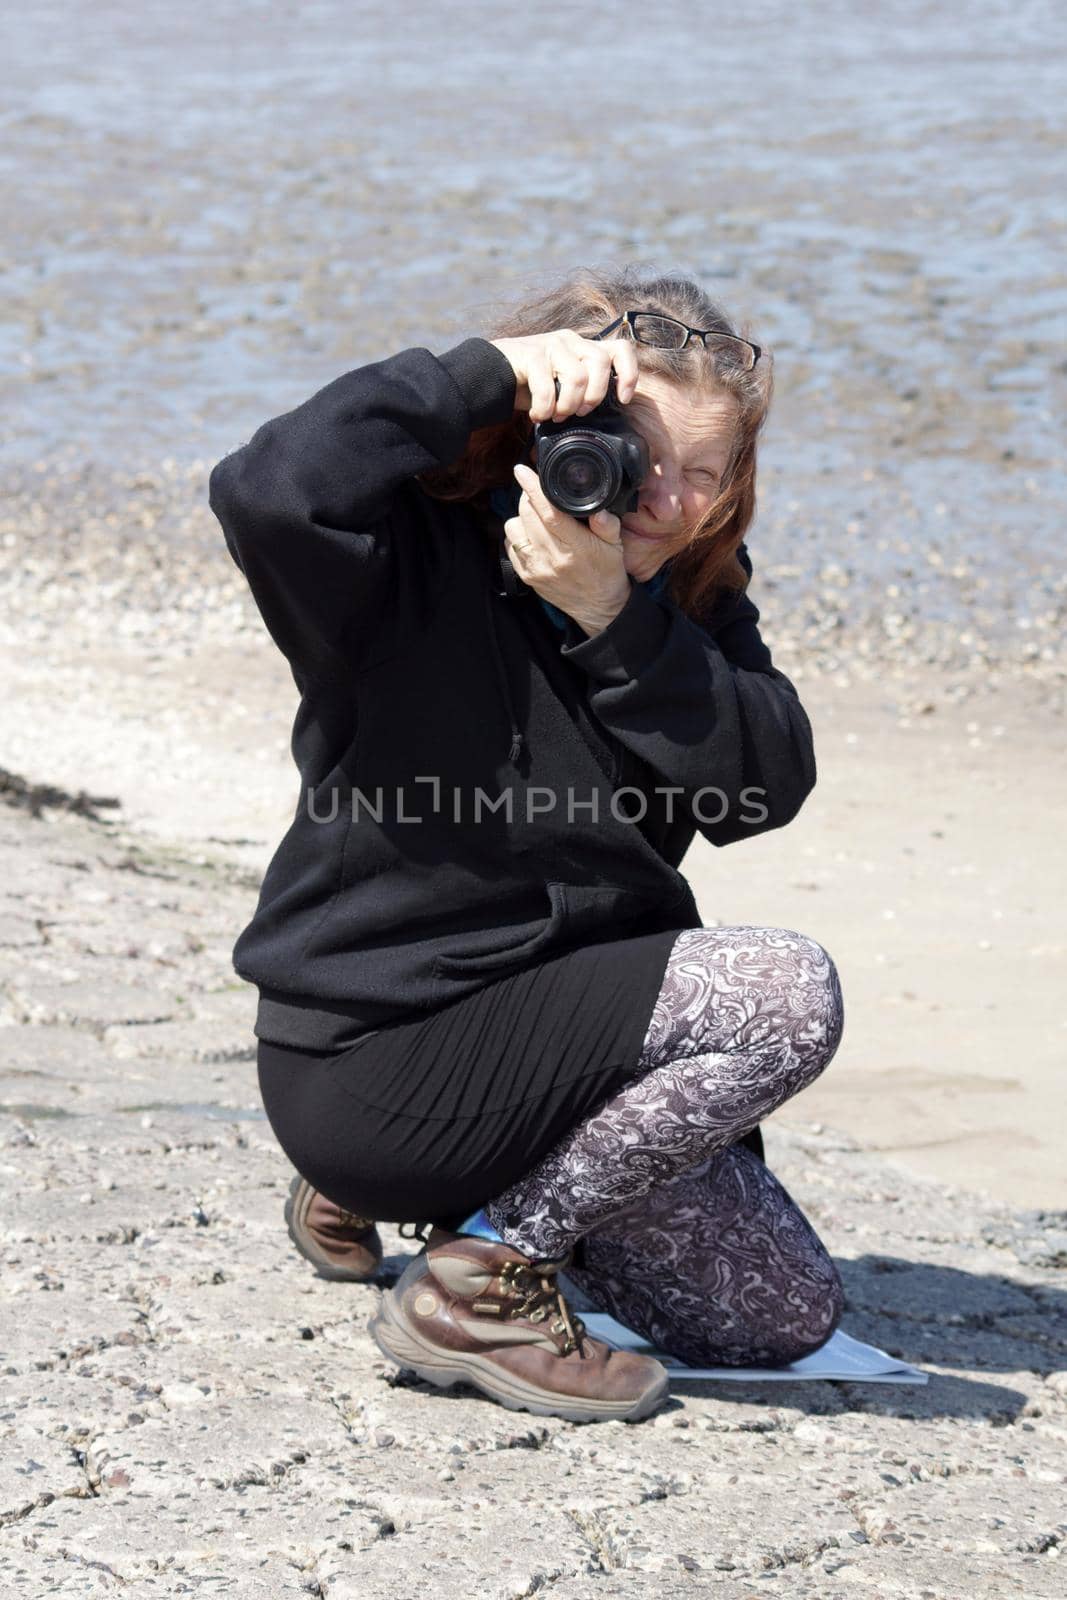 Elderly woman in black clothes photographs the photographer. She kneels on the sand and makes a vertical picture. Behind her, the silt of the Wadden Sea is visible